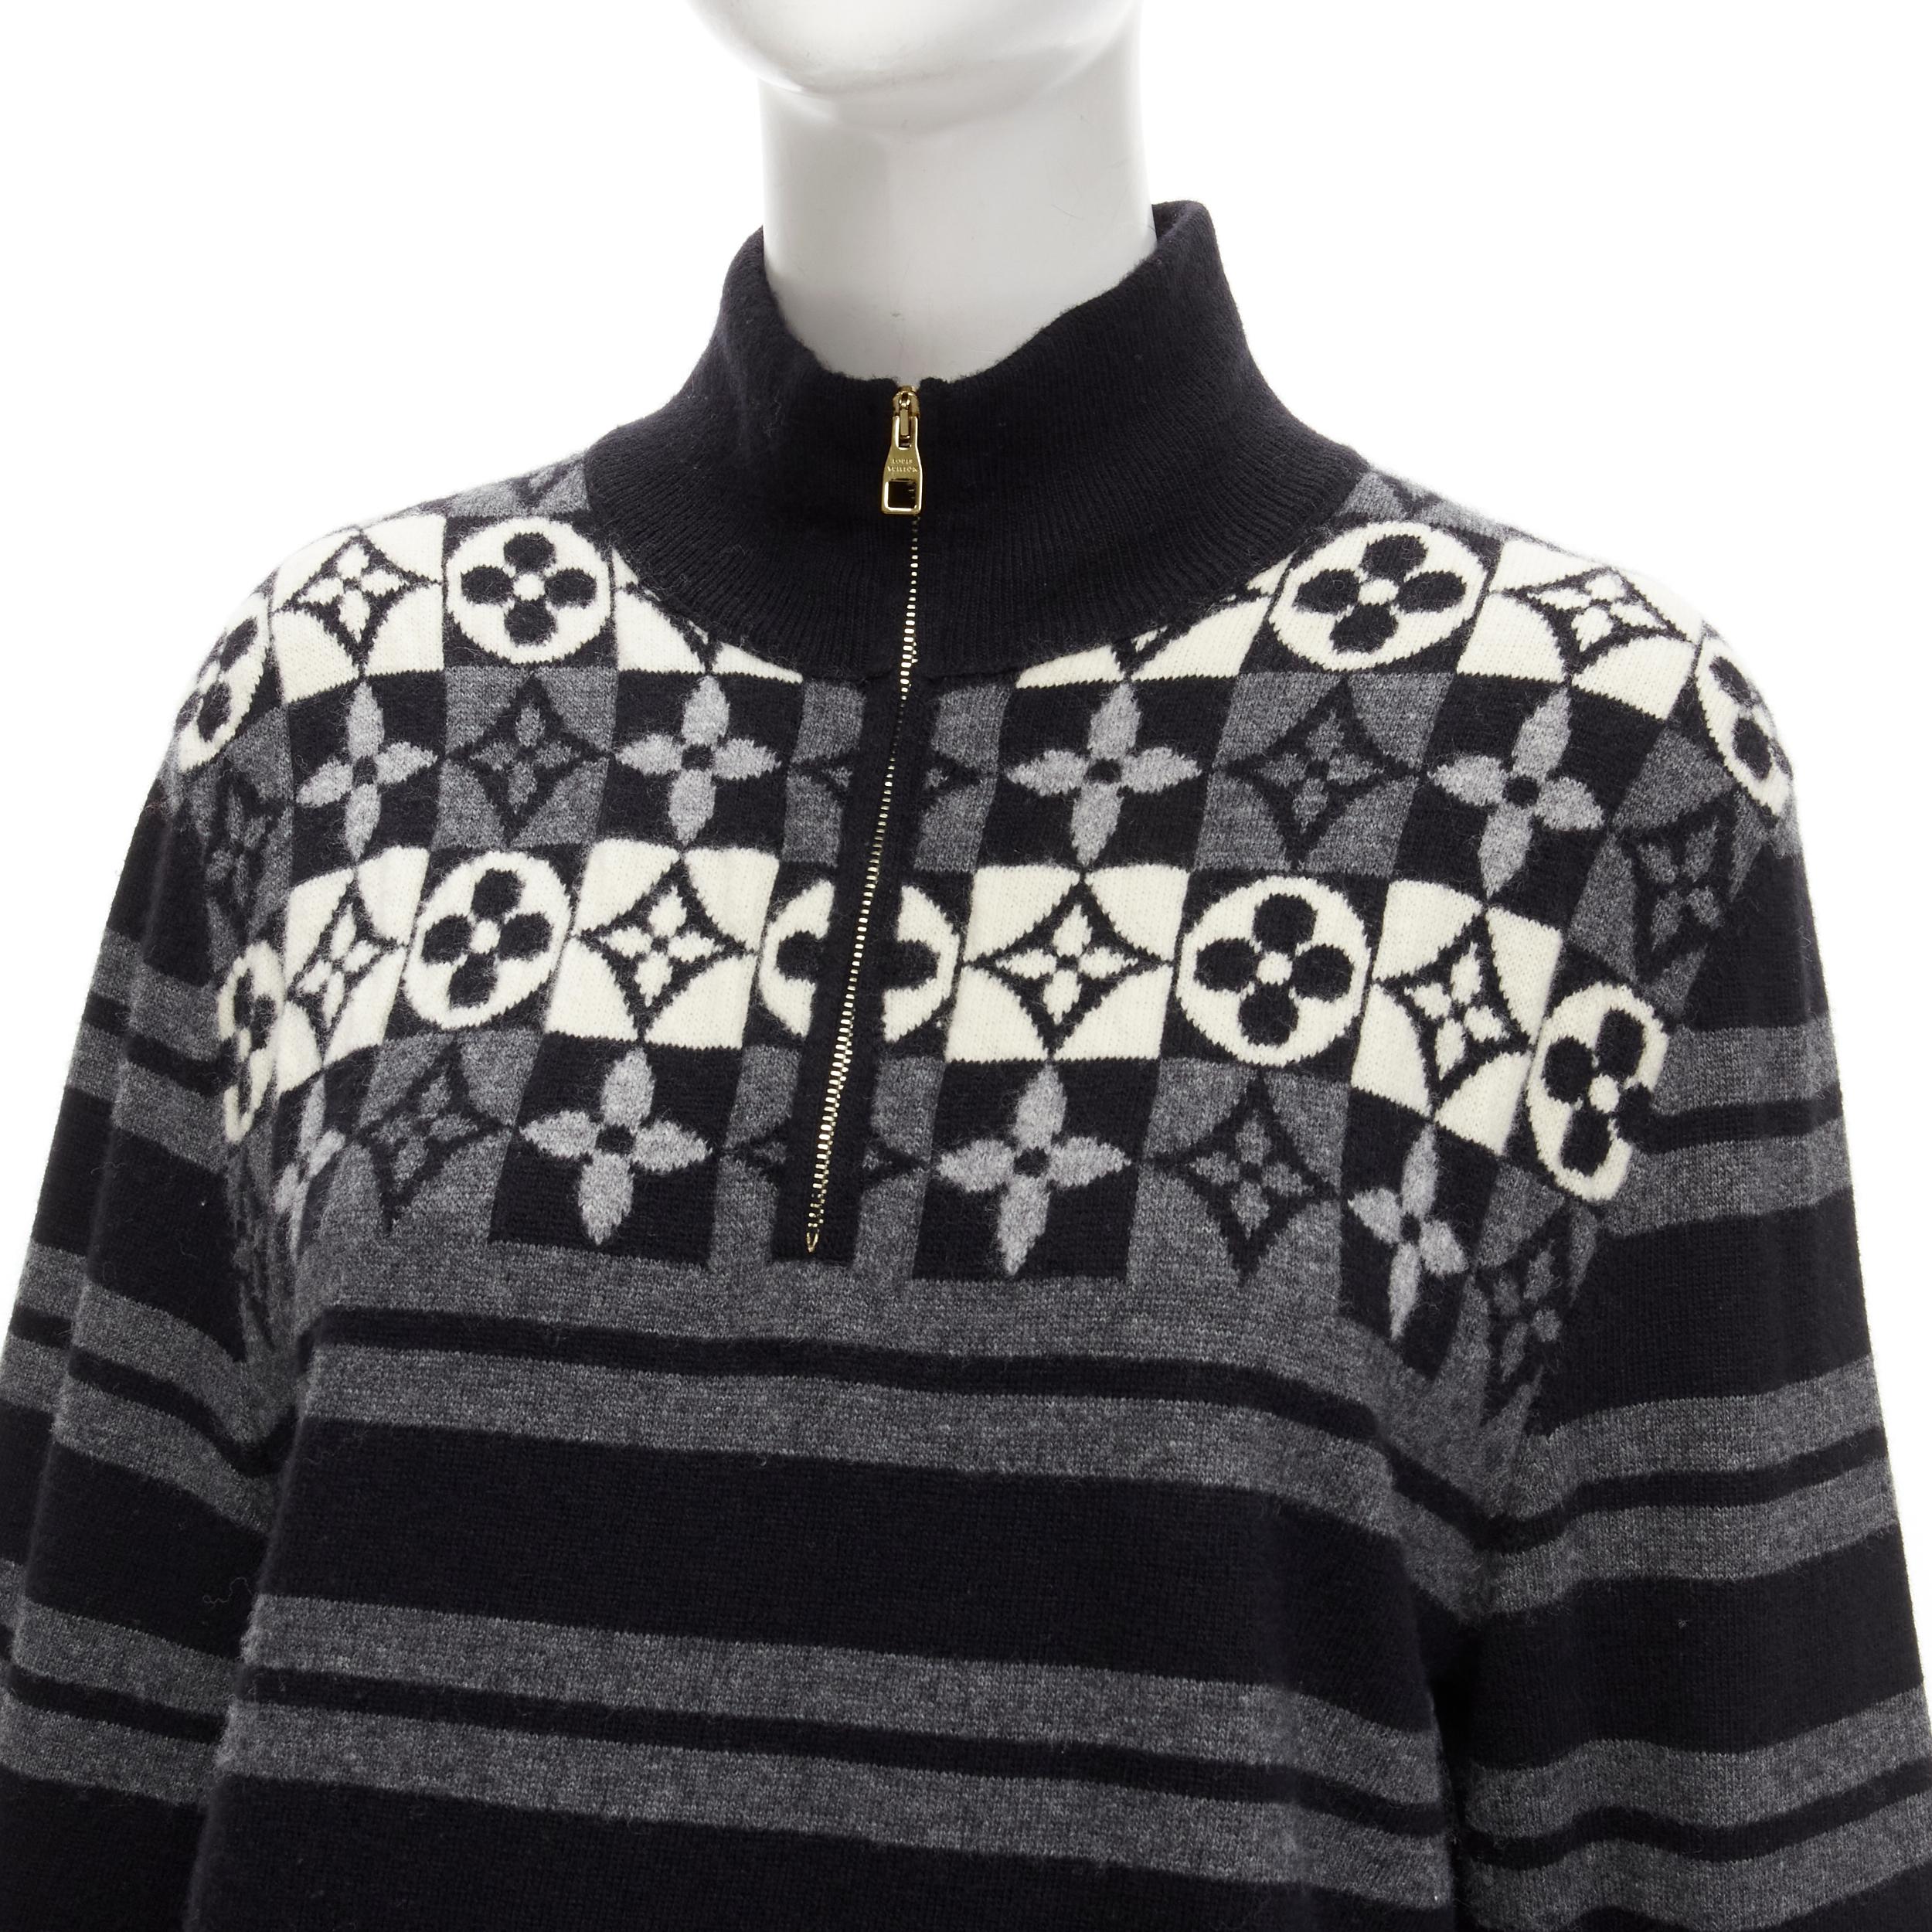 LOUIS VUITTON 100% wool LV floral motive stripe turtle neck knit sweater M
Reference: TGAS/C01689
Brand: Louis Vuitton
Material: Wool
Color: Black, Multicolour
Pattern: Striped
Closure: Zip
Extra Details: LV logo zip detail at neck.
Made in: